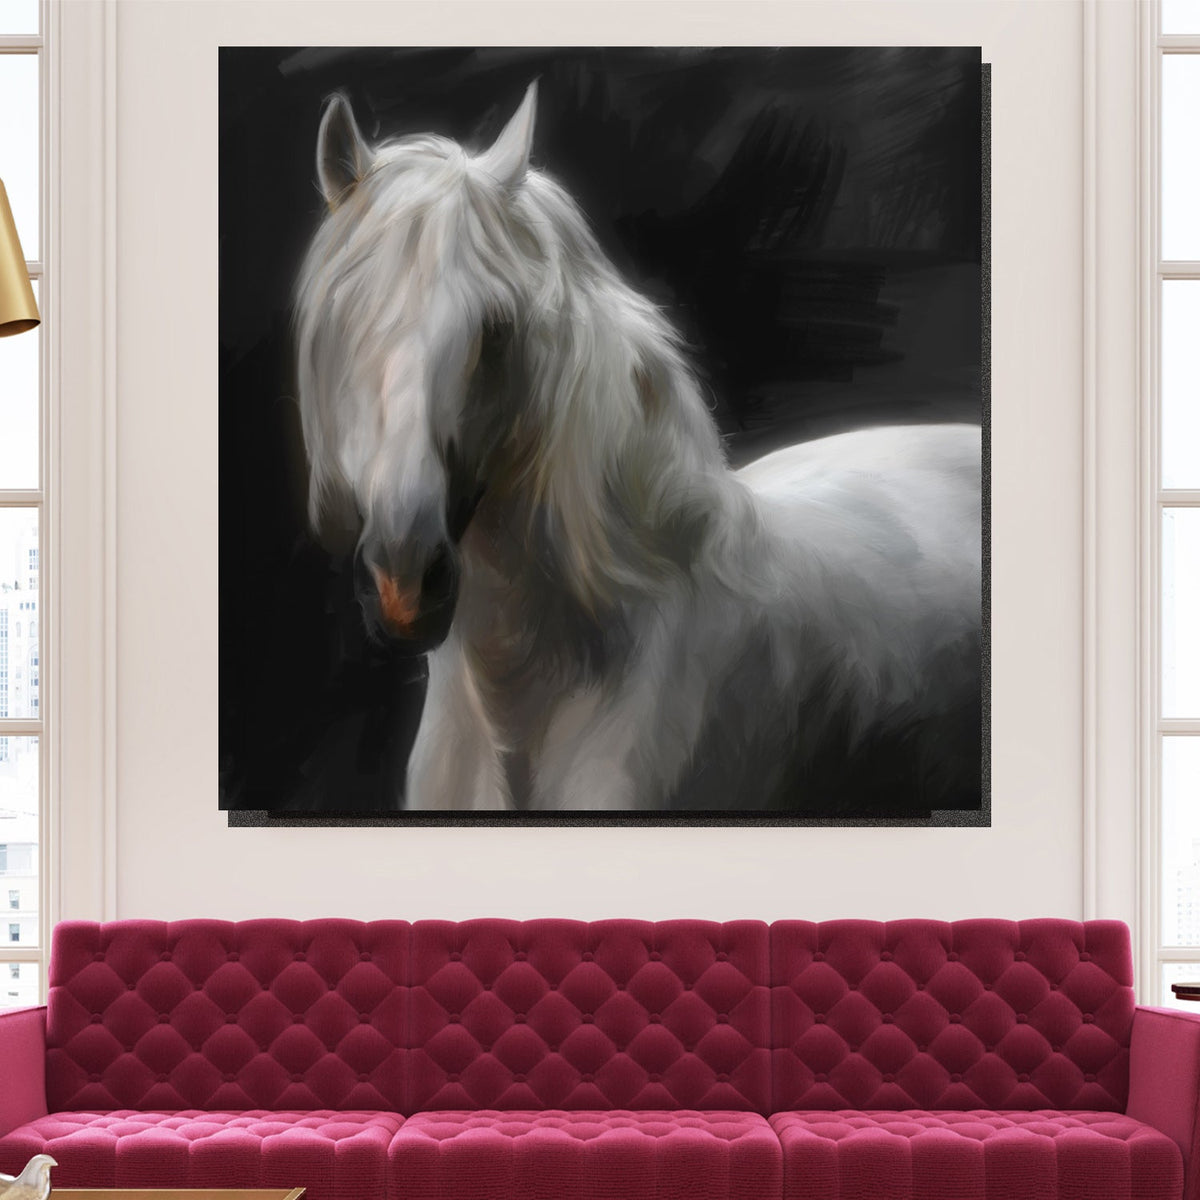 https://cdn.shopify.com/s/files/1/0387/9986/8044/products/AndalusianHorseCanvasArtprintStretched-3.jpg